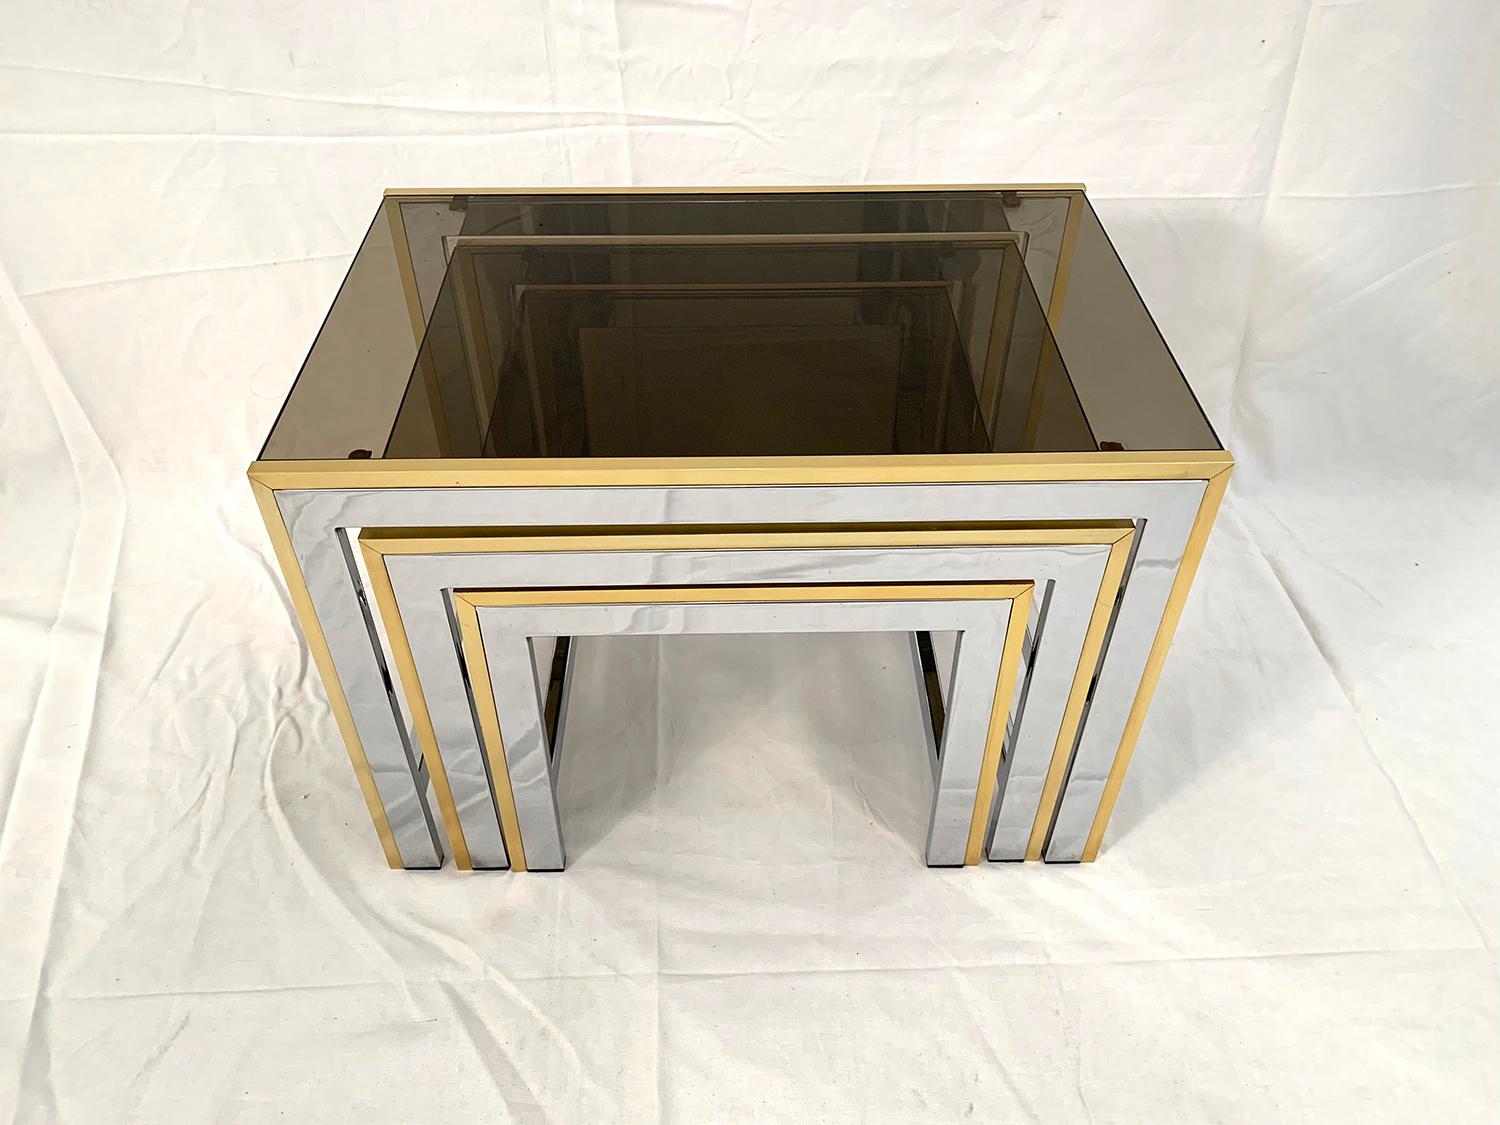 Rare nesting table set designed by Renato Zevi, 1970. The set consists of three tables with a chrome and brass structure topped with a smoked glass. Excellent condition

Rare ensemble de tables gigognes dessinées par Renato Zevi, 1970. L'ensemble